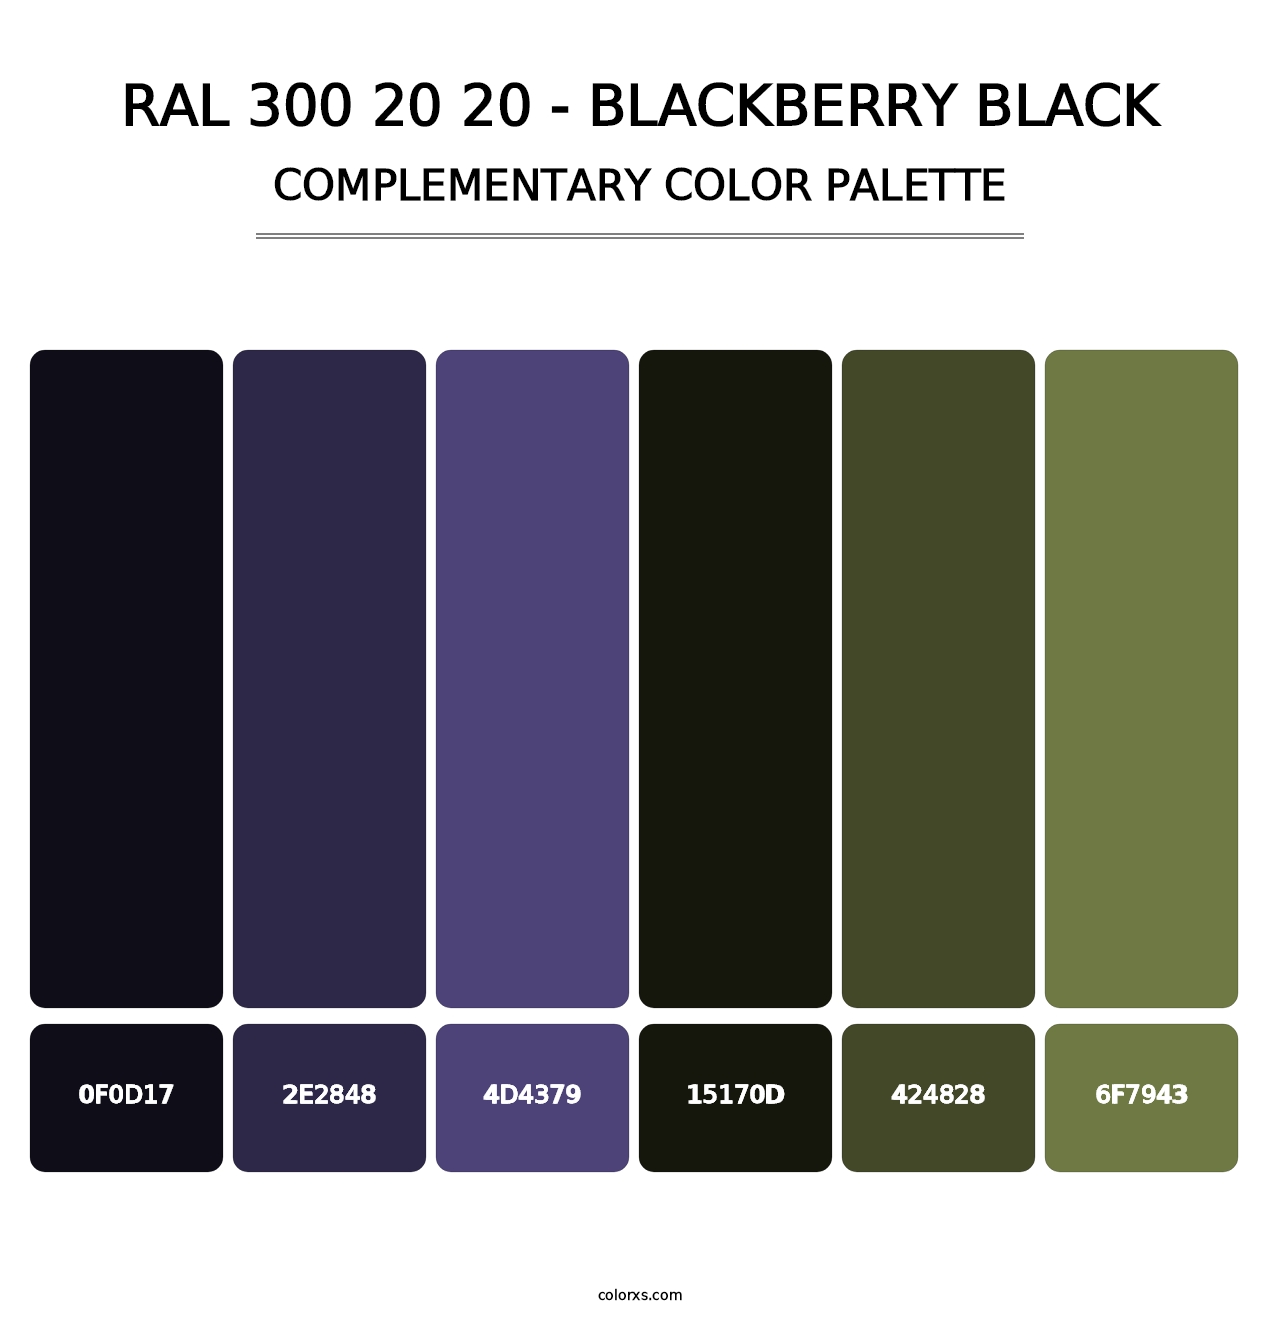 RAL 300 20 20 - Blackberry Black - Complementary Color Palette